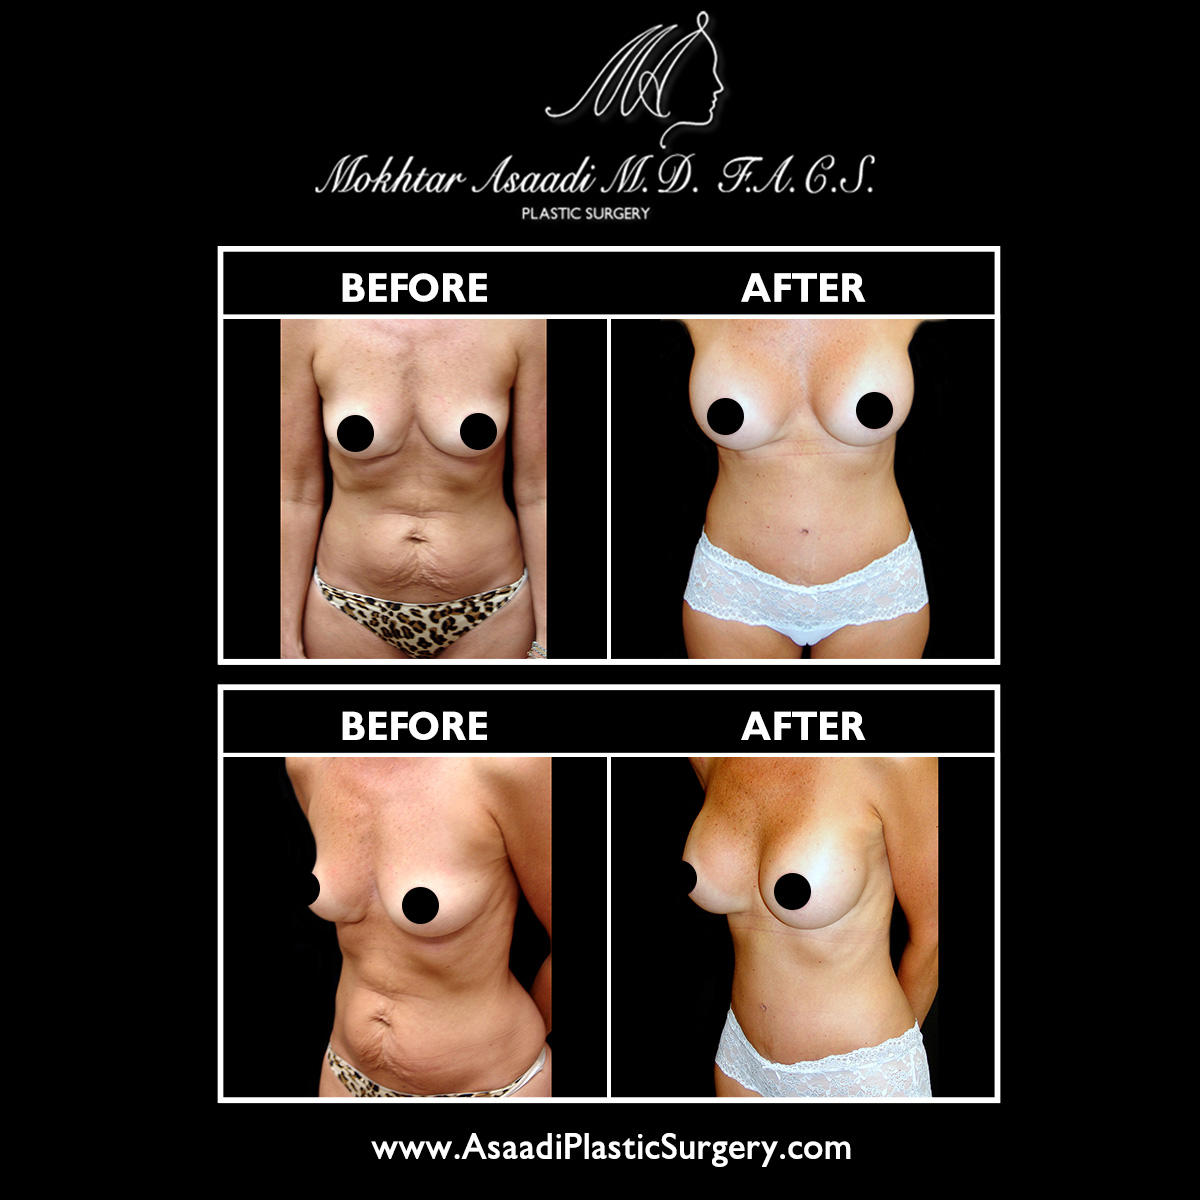 Breast augmentation surgery in New Jersey can help enhance the size, shape, and symmetry of the breasts. Dr. Asaadi will only use saline implants for breast augmentation surgery and utilizes the inframammary incision for the most natural-looking results.